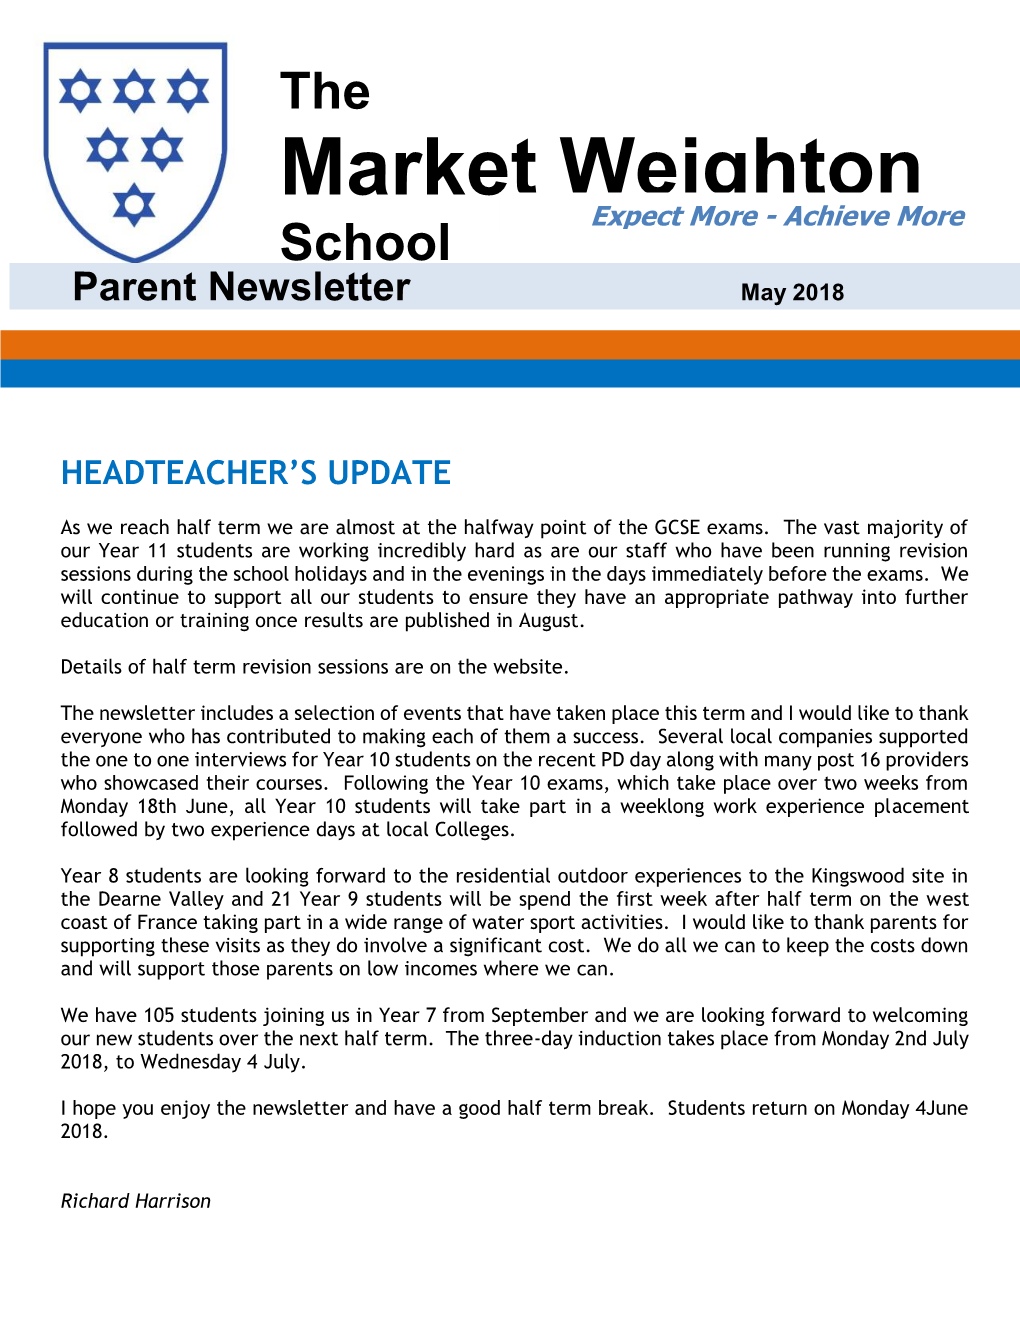 Parent Newsletter May 2018